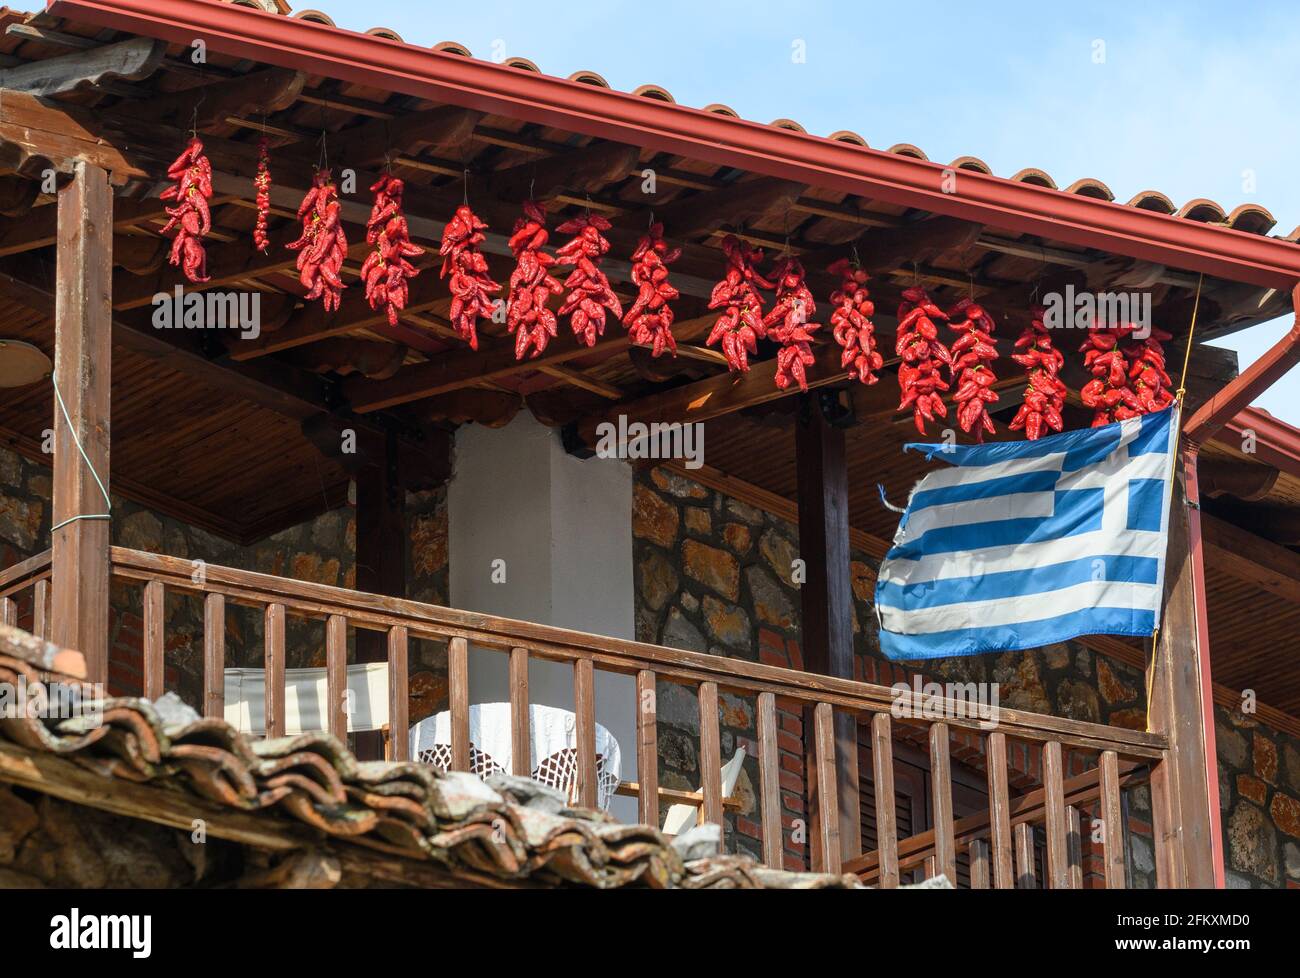 Chilli peppers drying and a Greek flag flying, on the balcony of  a house in the fishing village of Psarades on Lake Prespa, Macedonia, Northern Greec Stock Photo